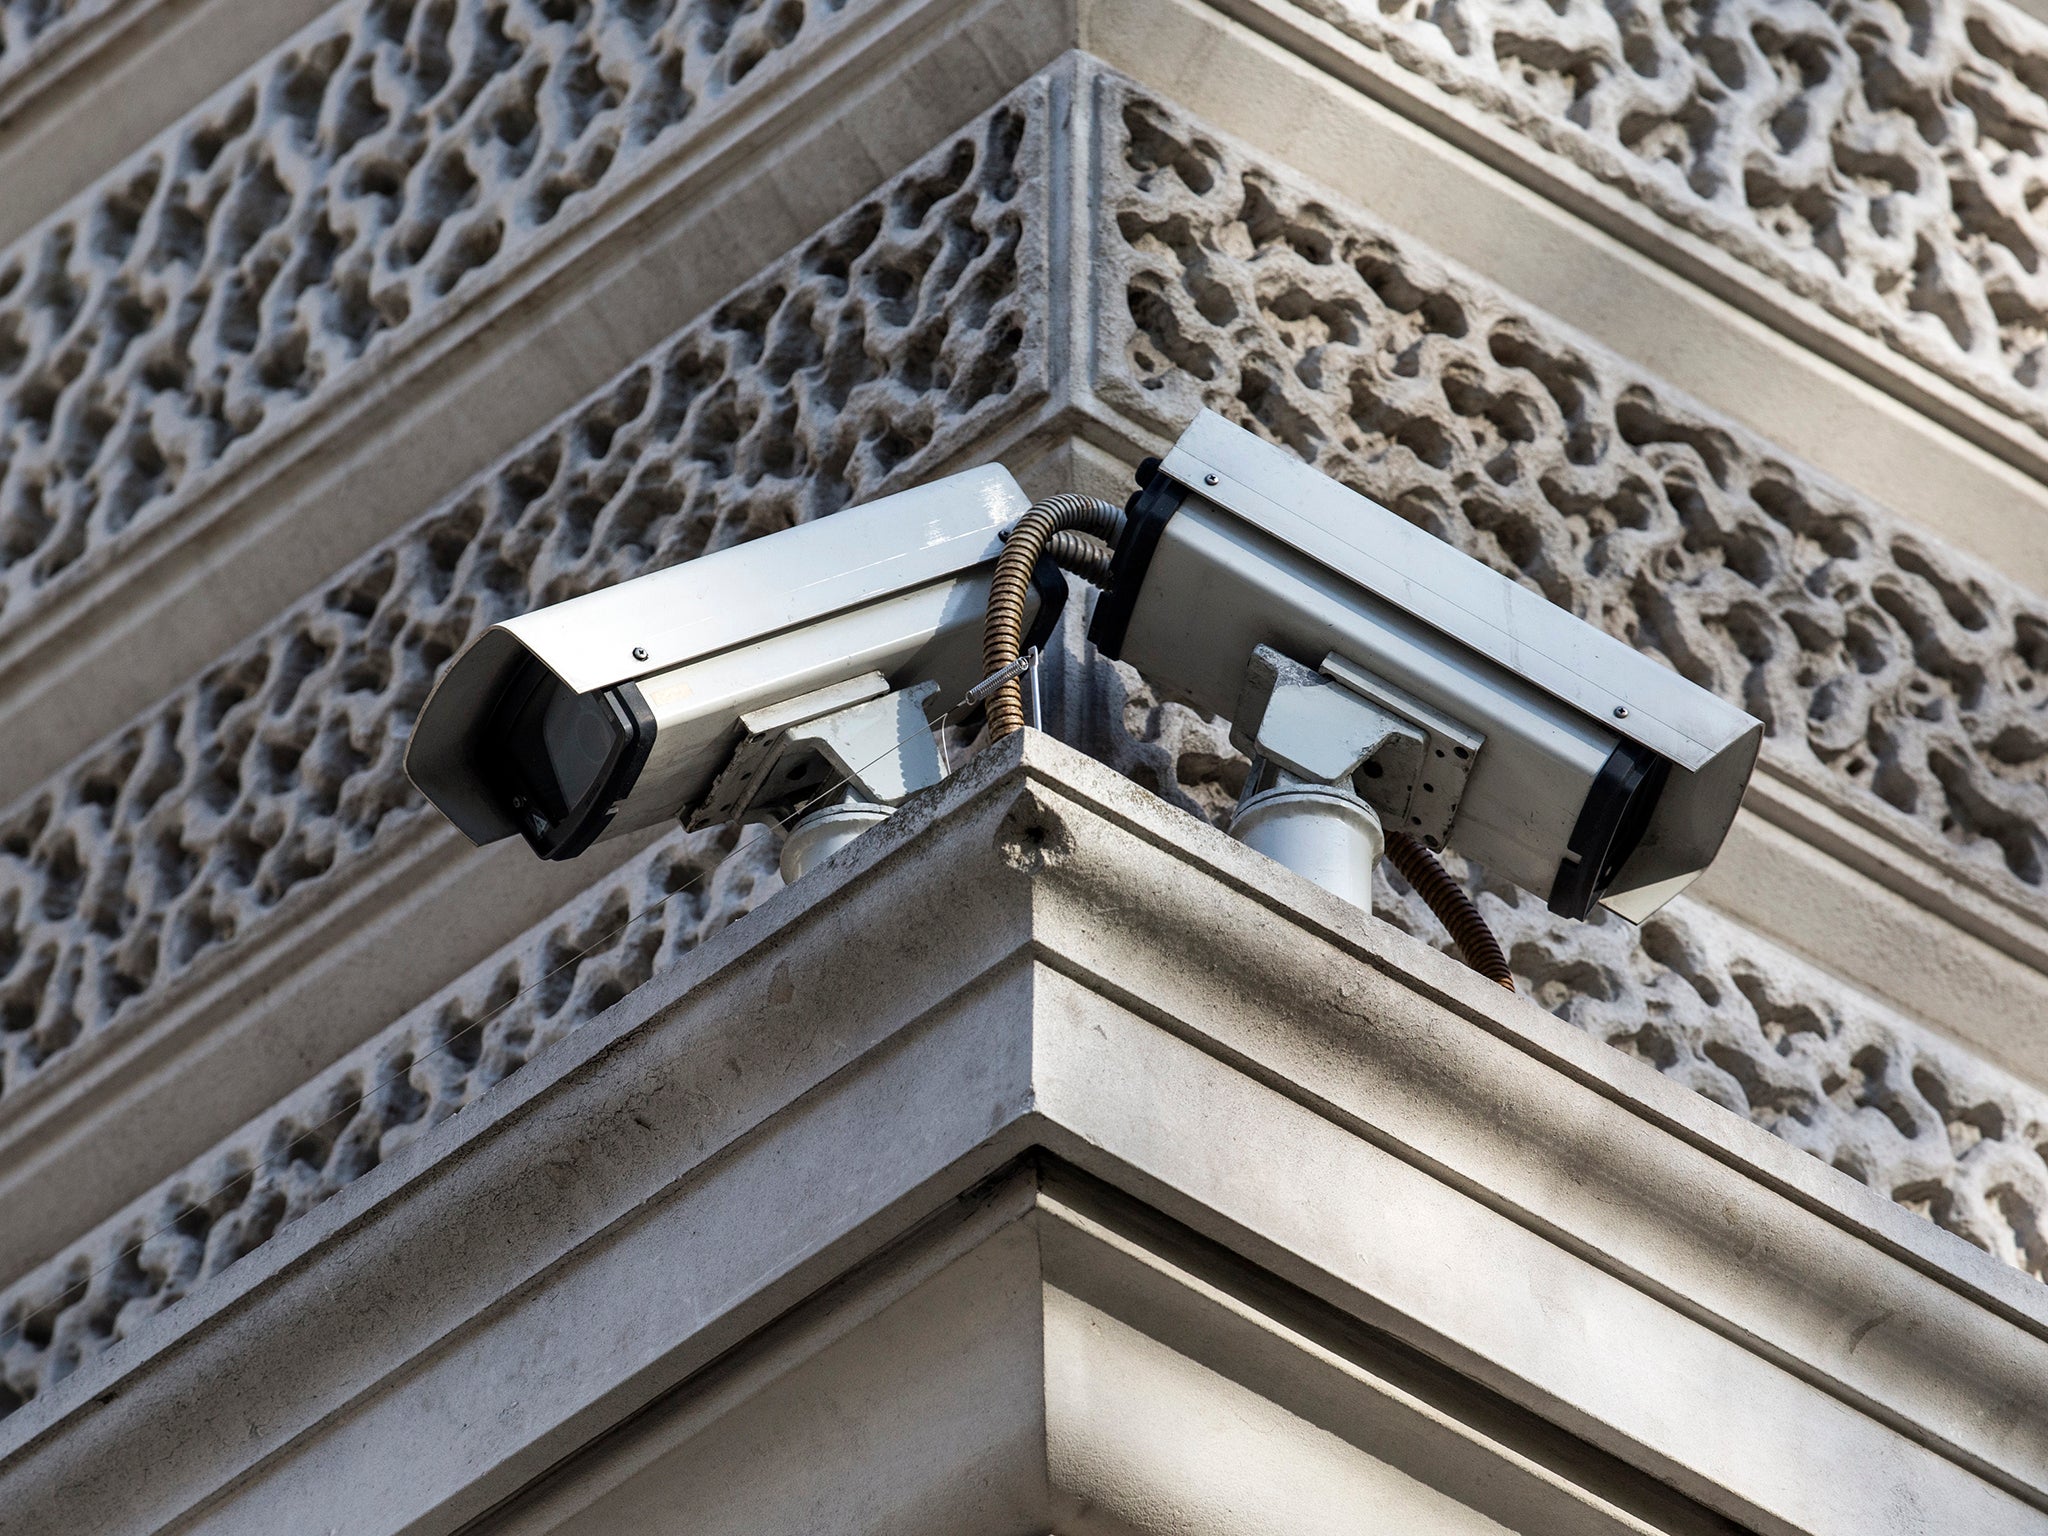 The security camera commissioner has said he is concerned about quantity of false positives